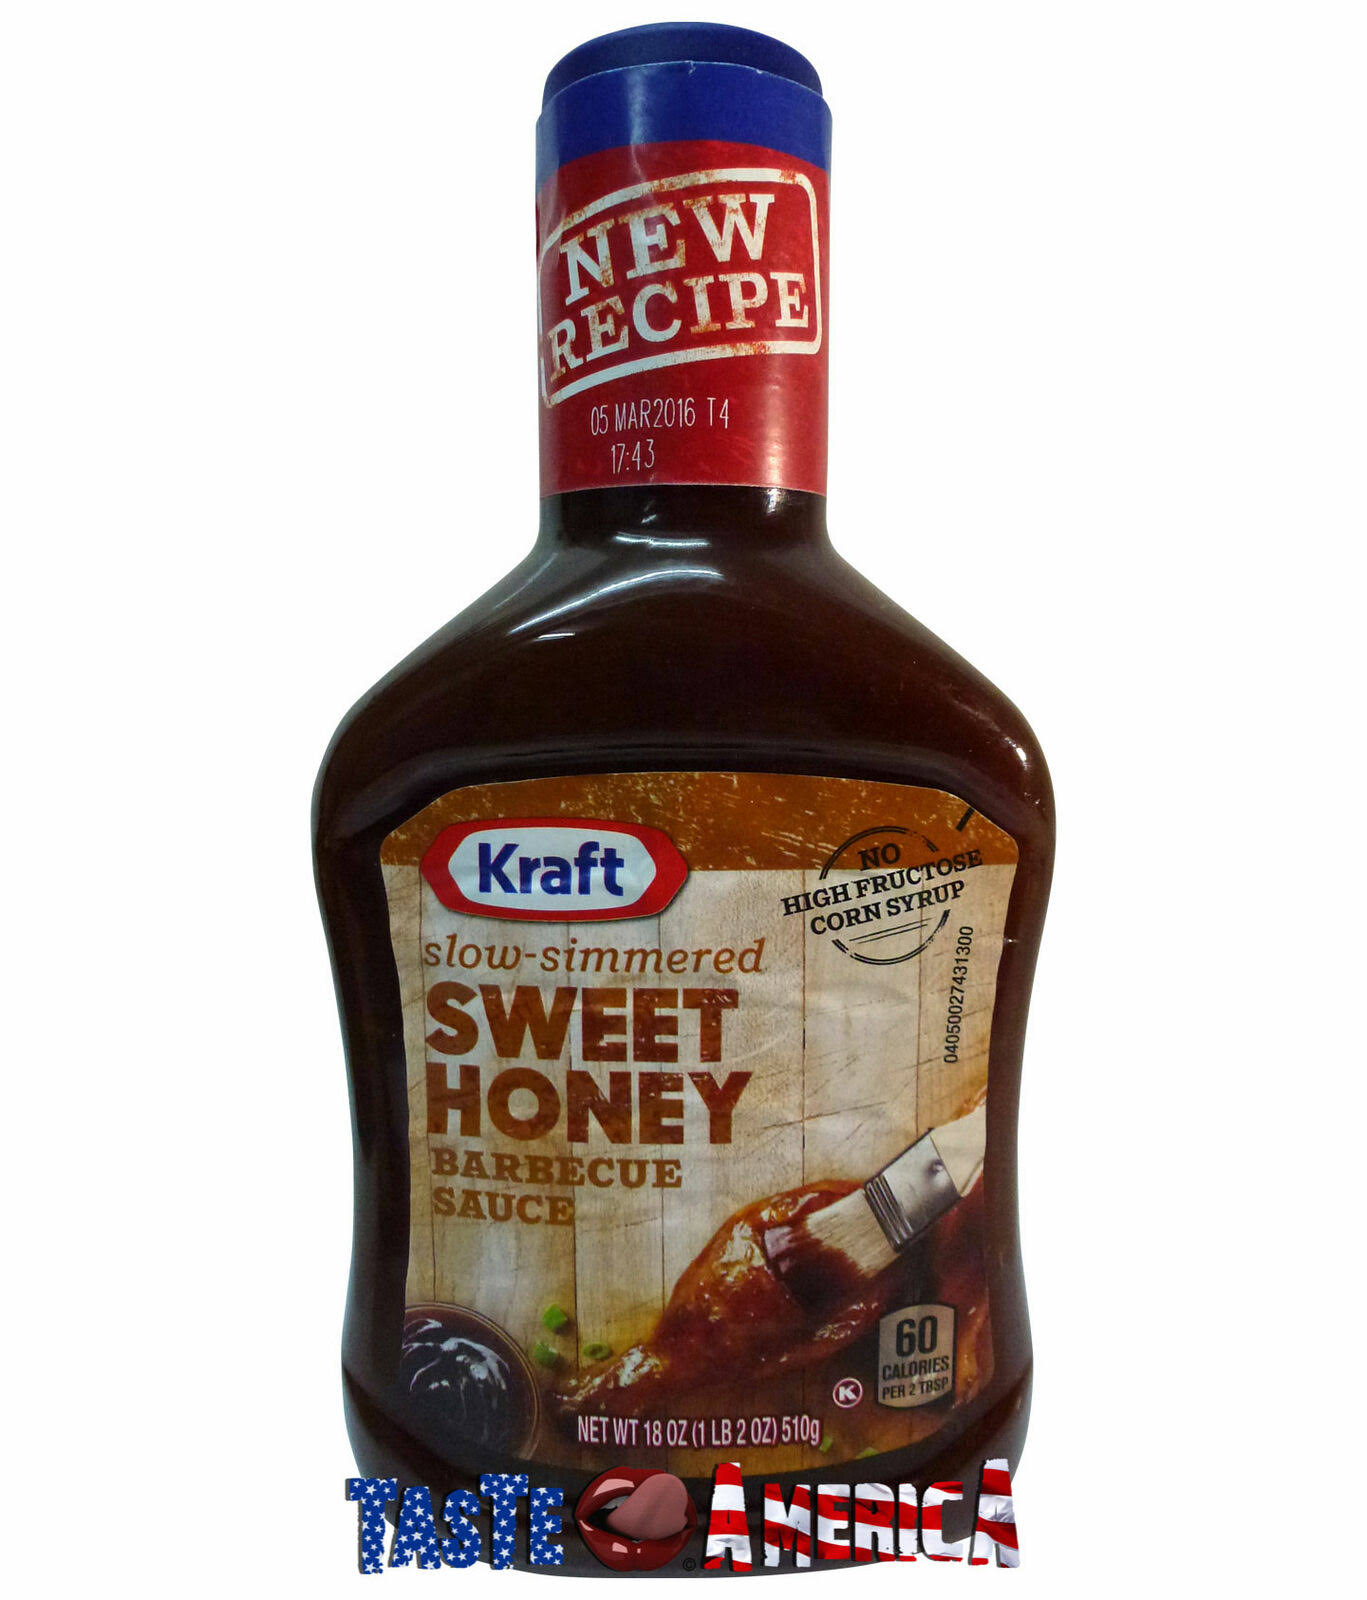 Kraft Slow Simmered Sweet Honey Barbecue Sauce and Dip - 18oz